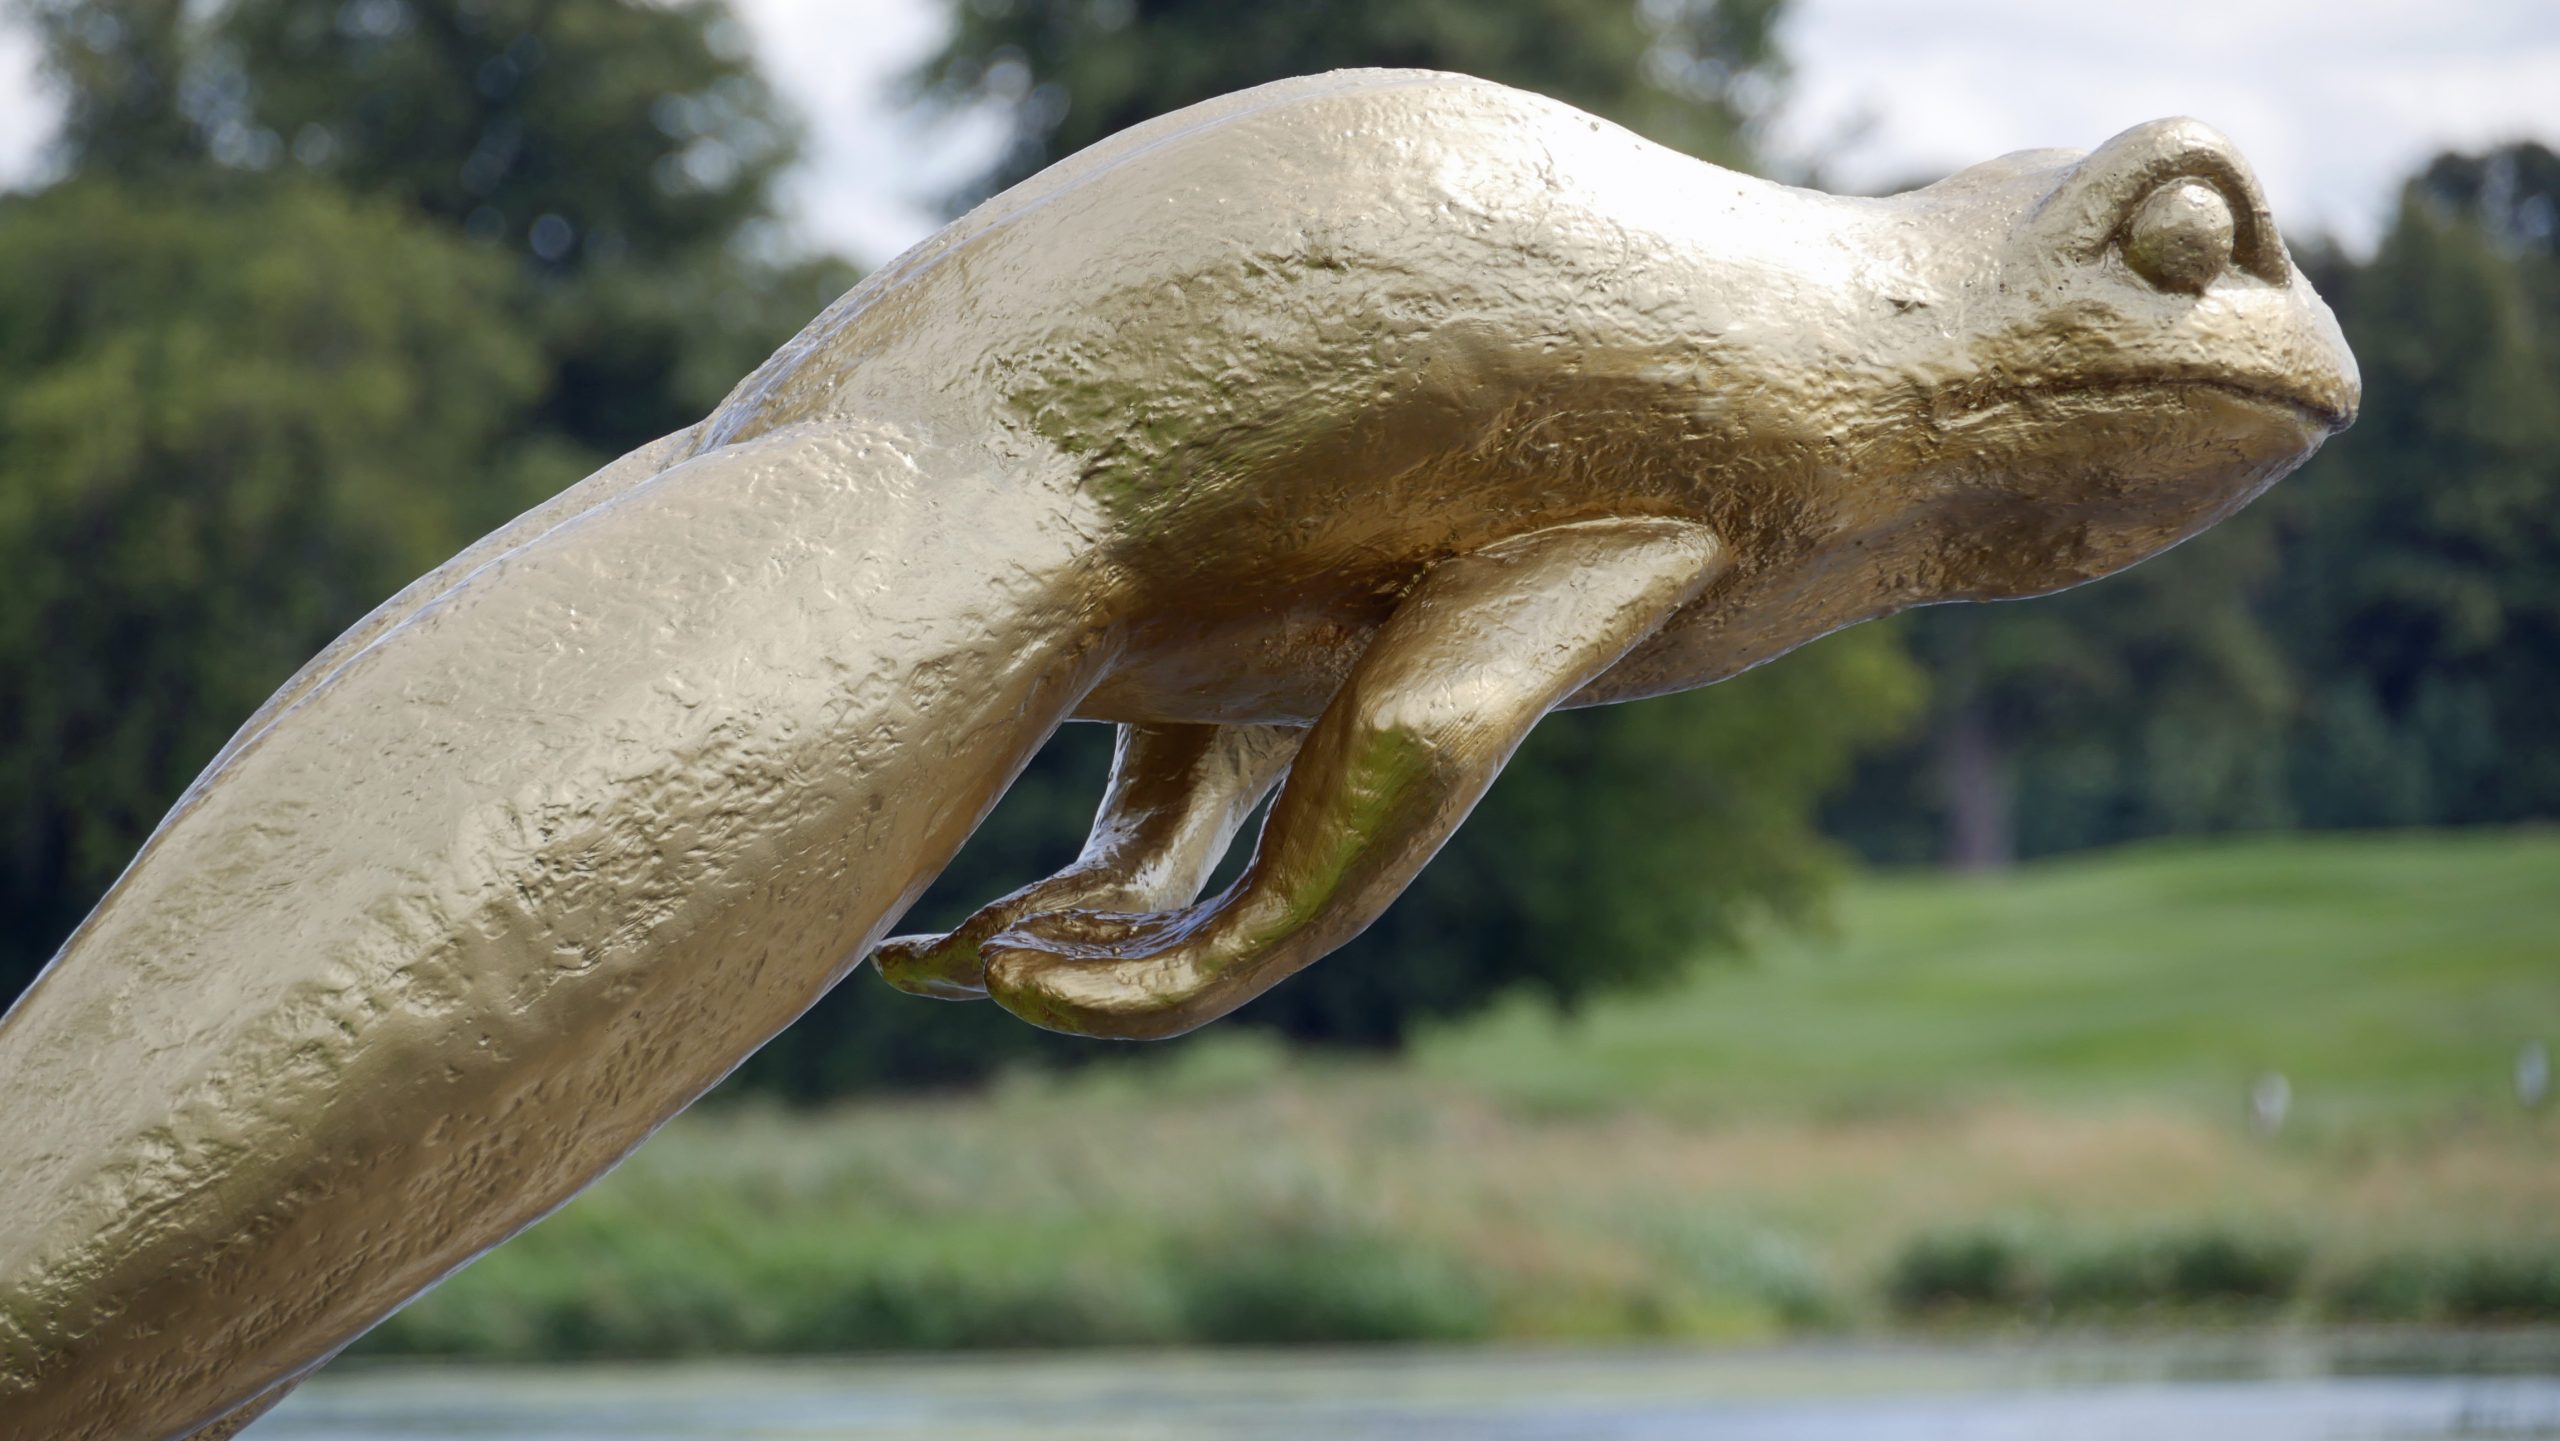 4 metre long sculpture of a gold giant frog leaping into the pond